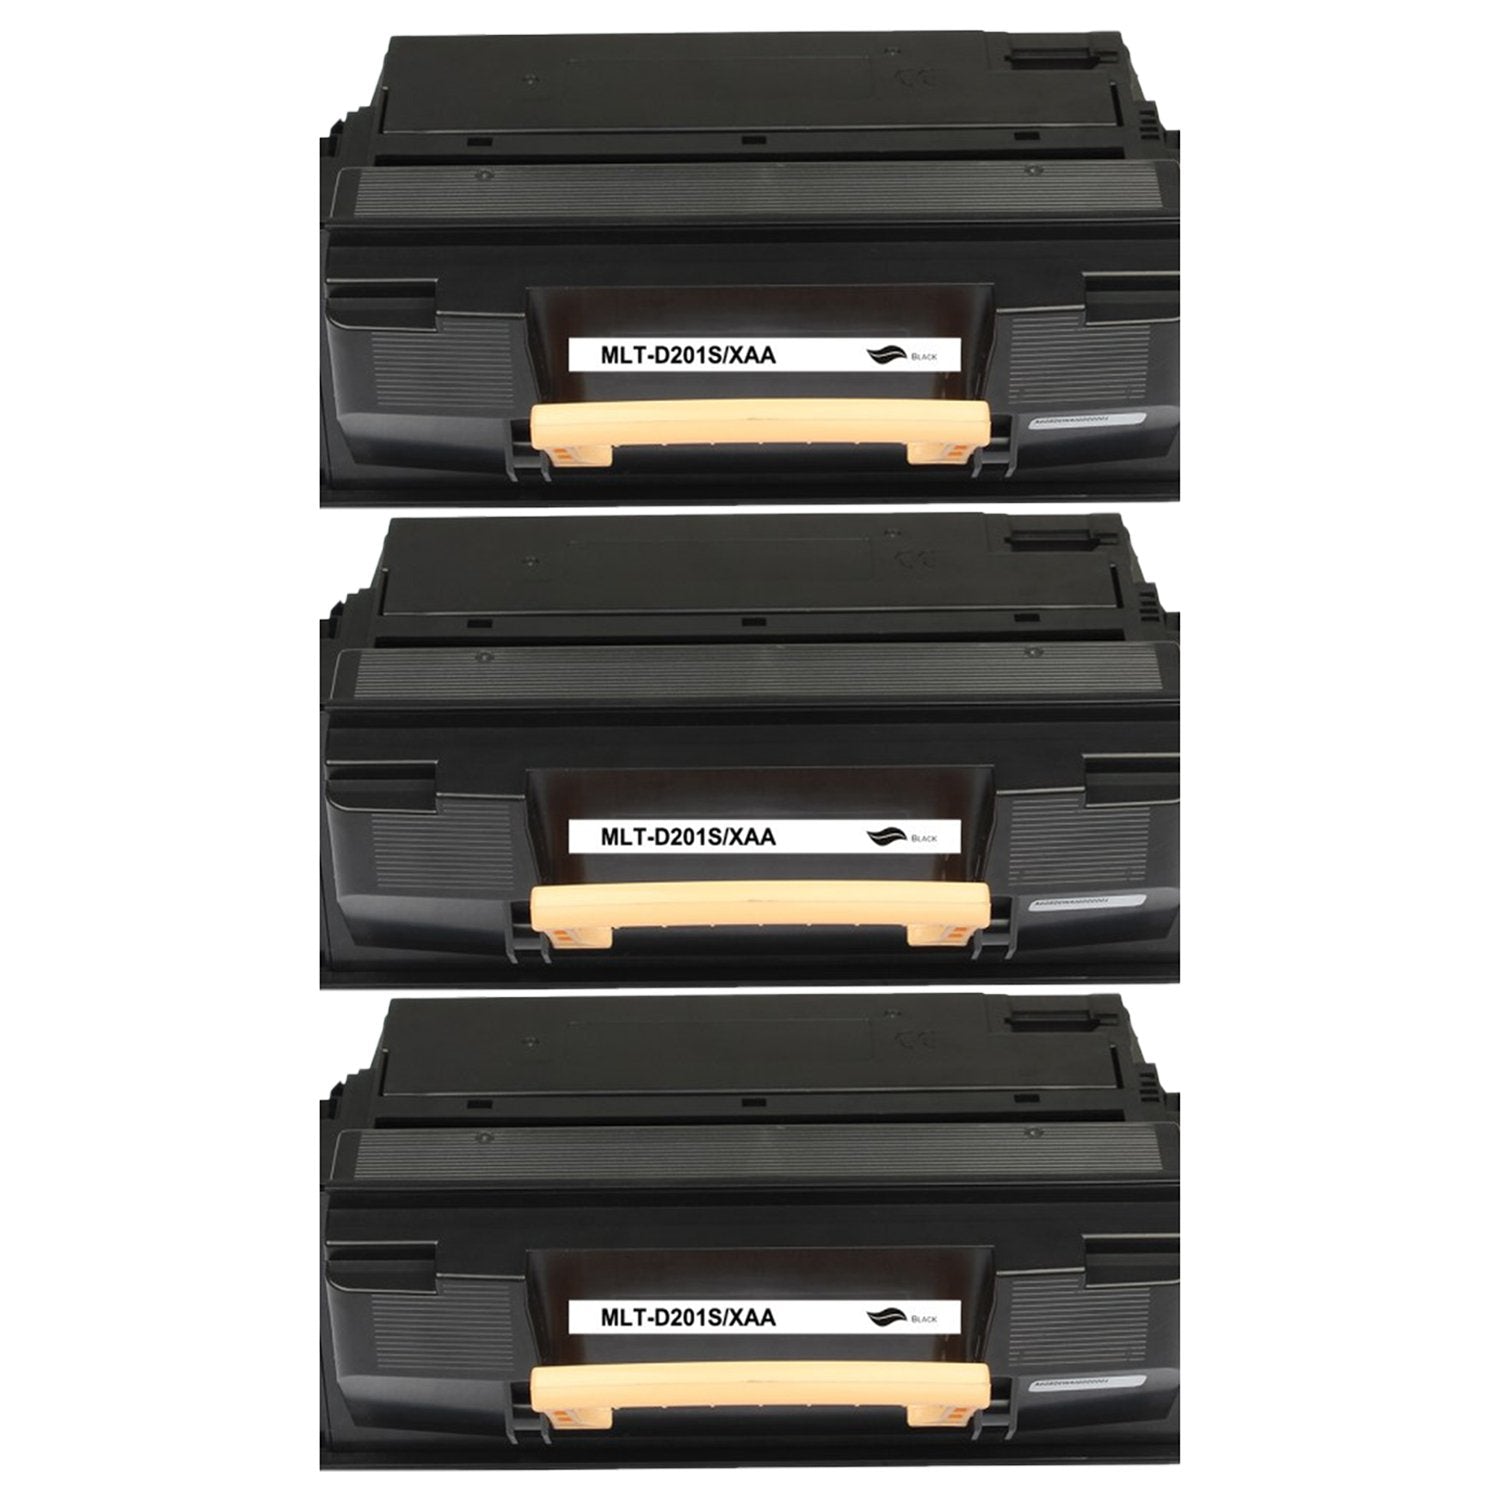 Absolute Toner Compatible Samsung MLT-D201S Black Toner Cartridge | Absolute Toner Samsung Toner Cartridges